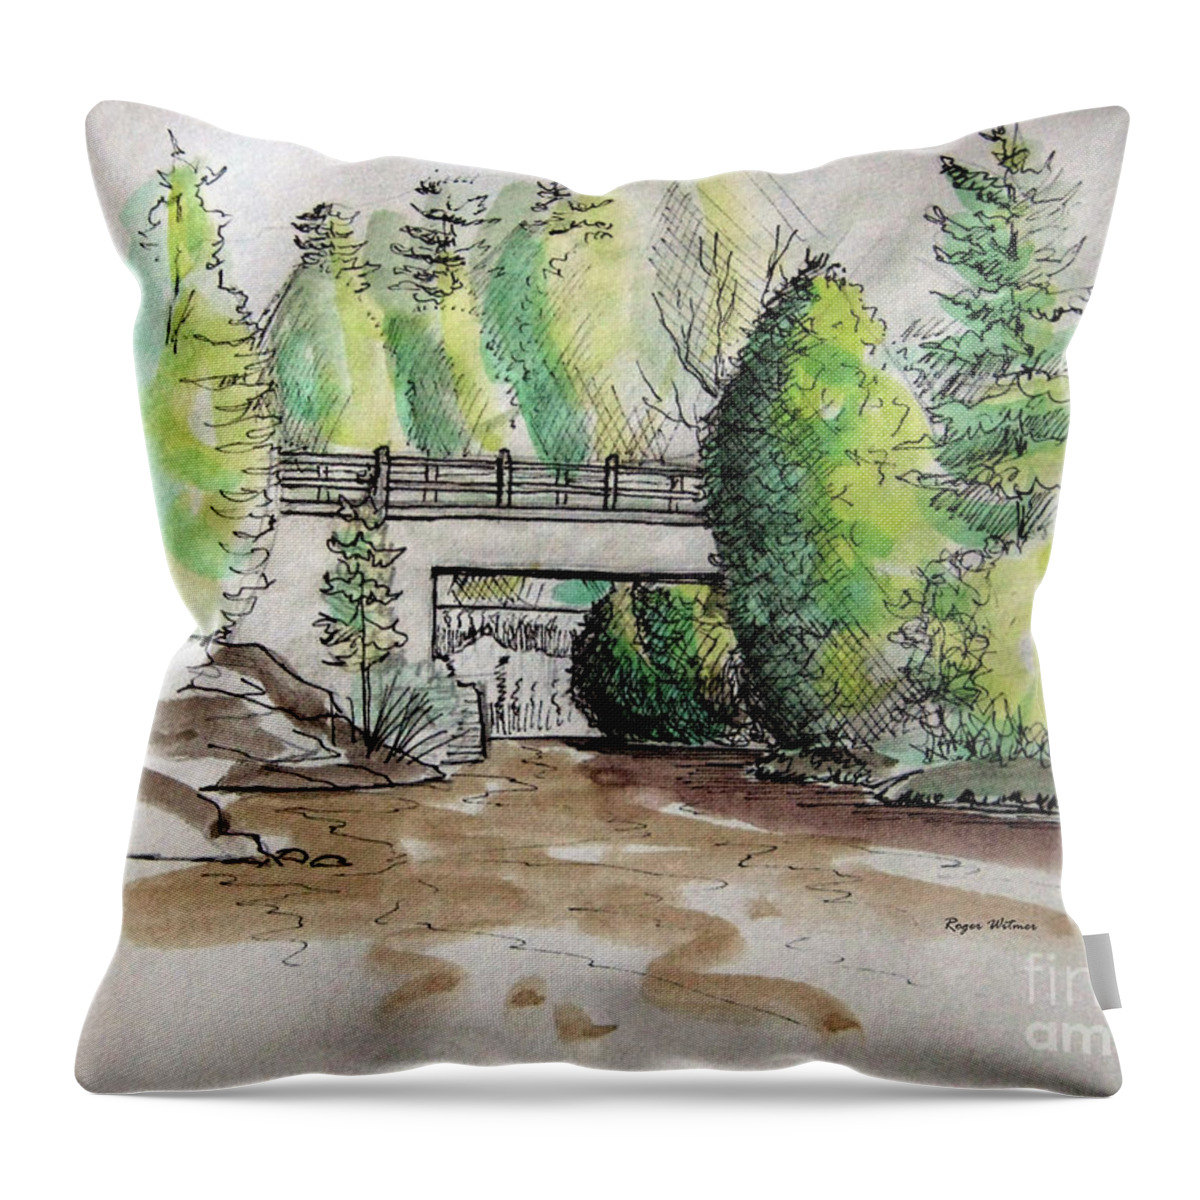 Bridge Throw Pillow featuring the painting Rockwood by Roger Witmer